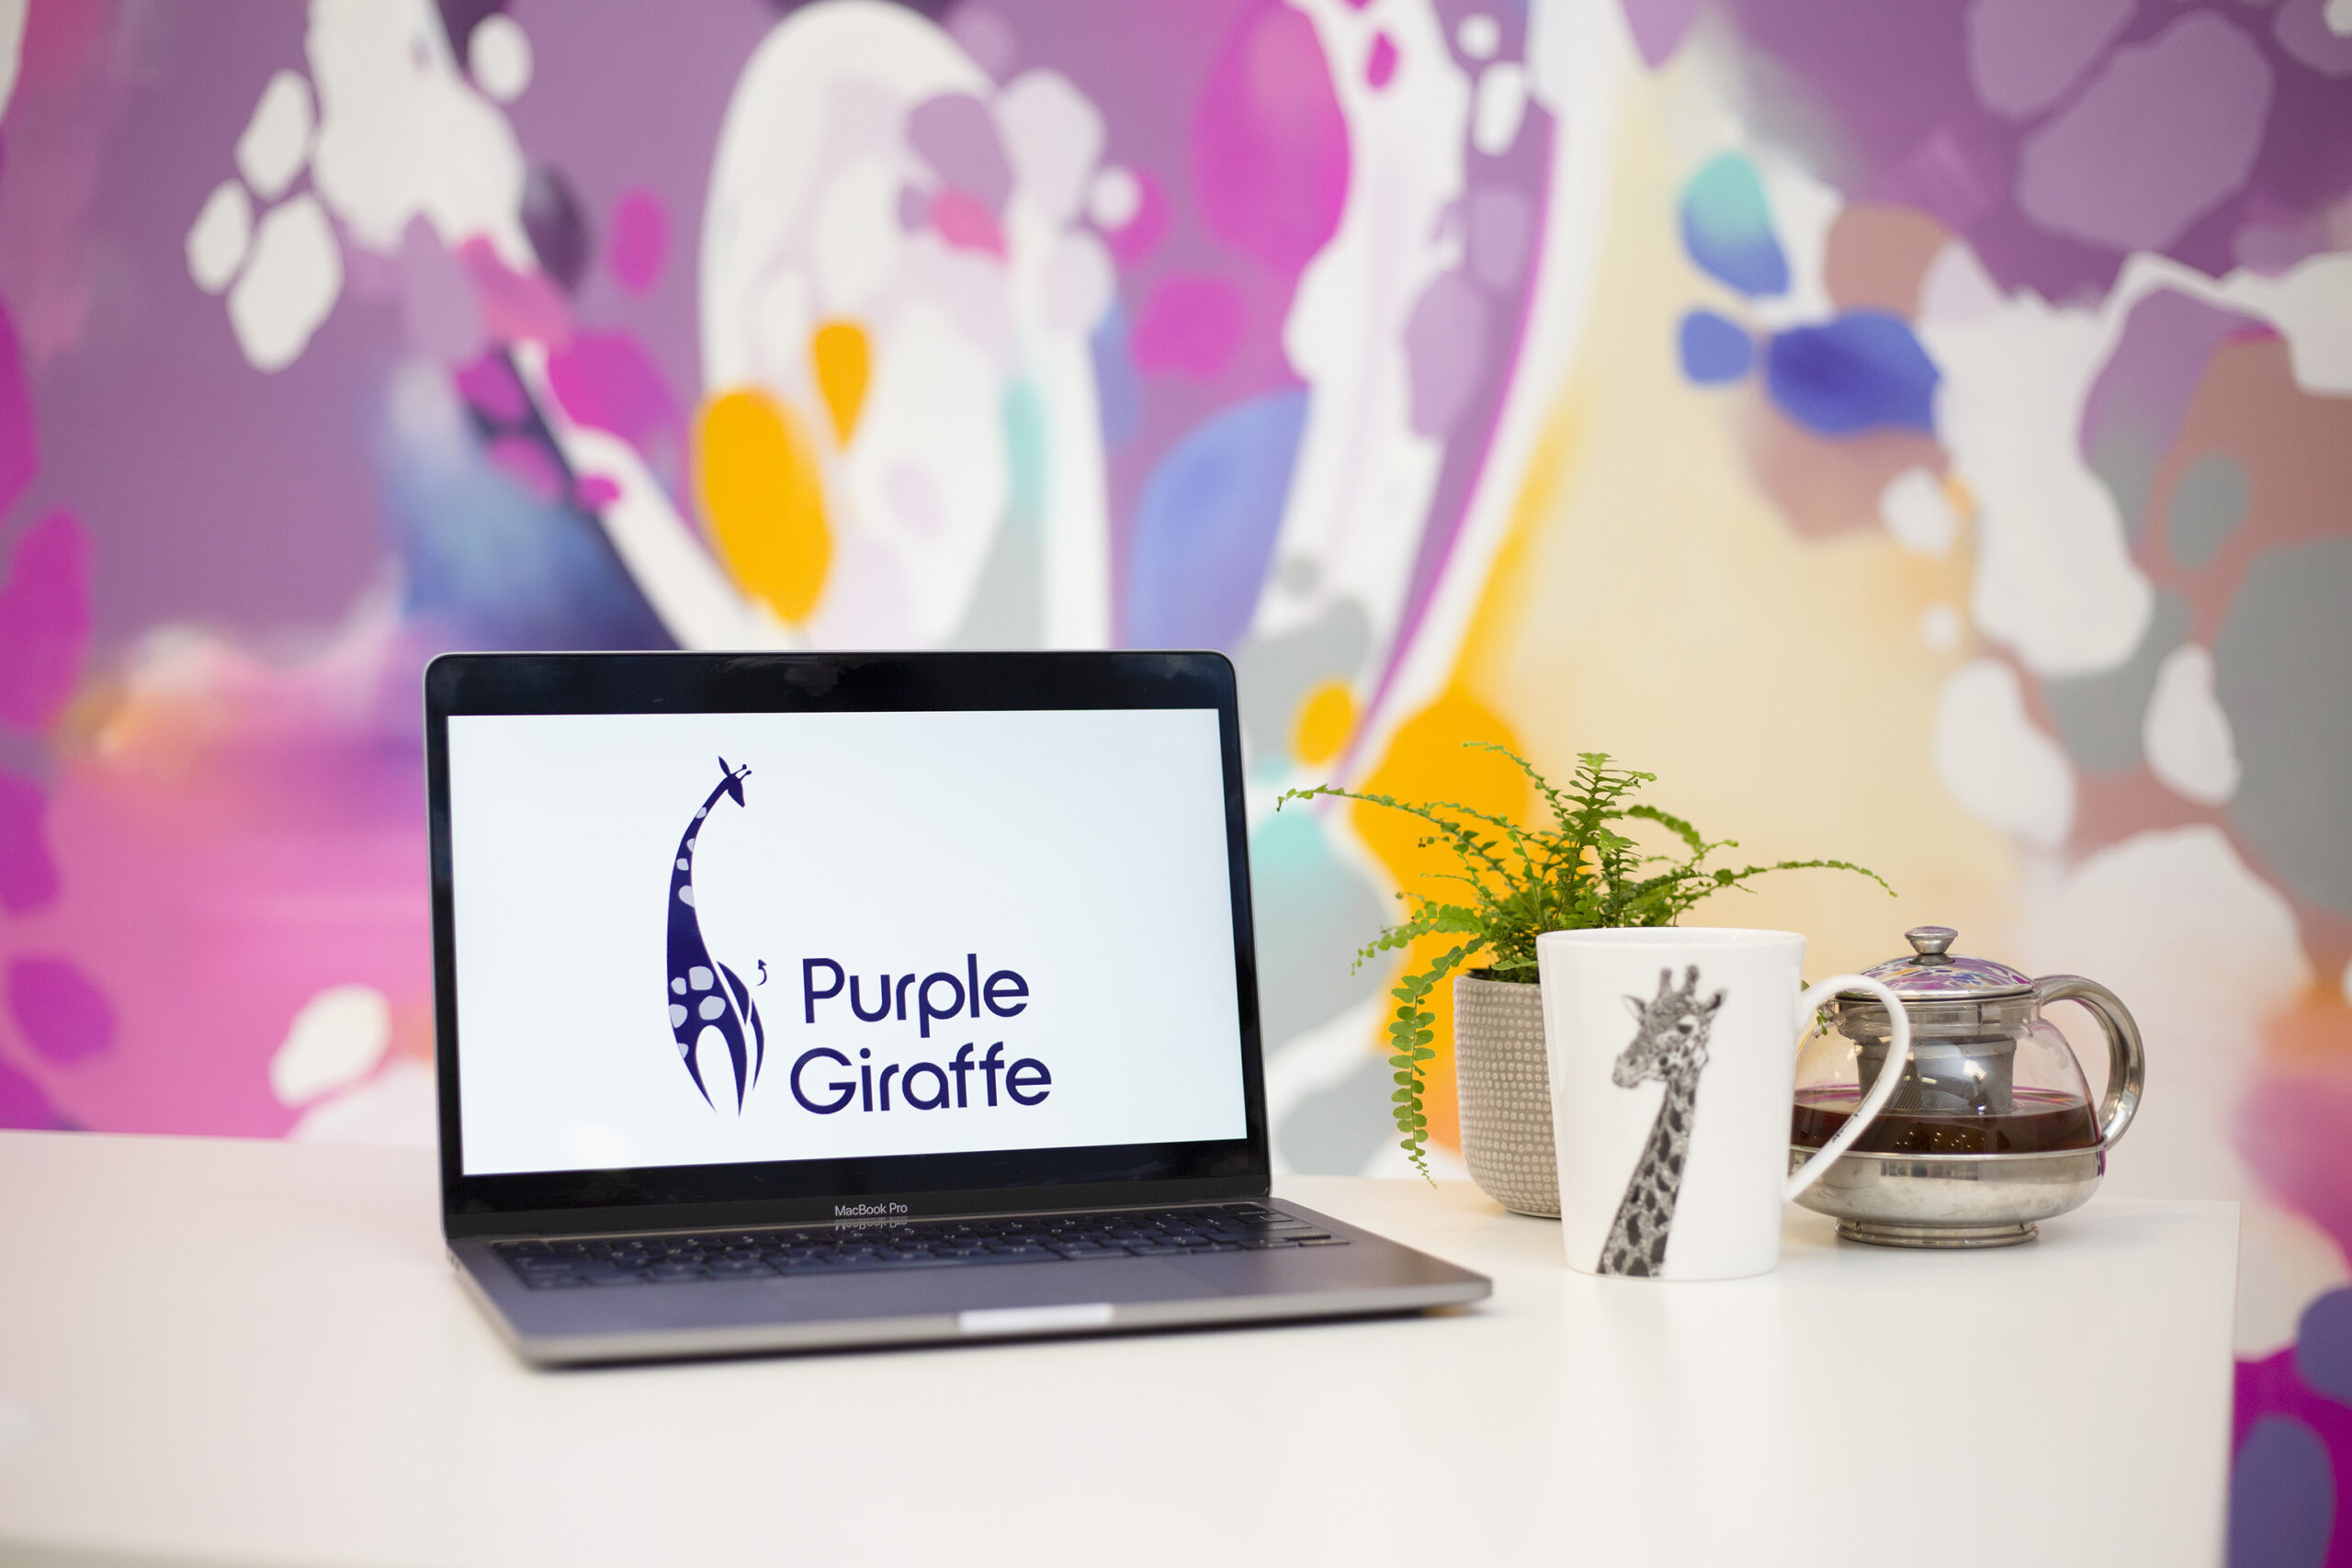 Purple Giraffe our story marketing consultant company laptop monitor using at work office setup workplace capacity